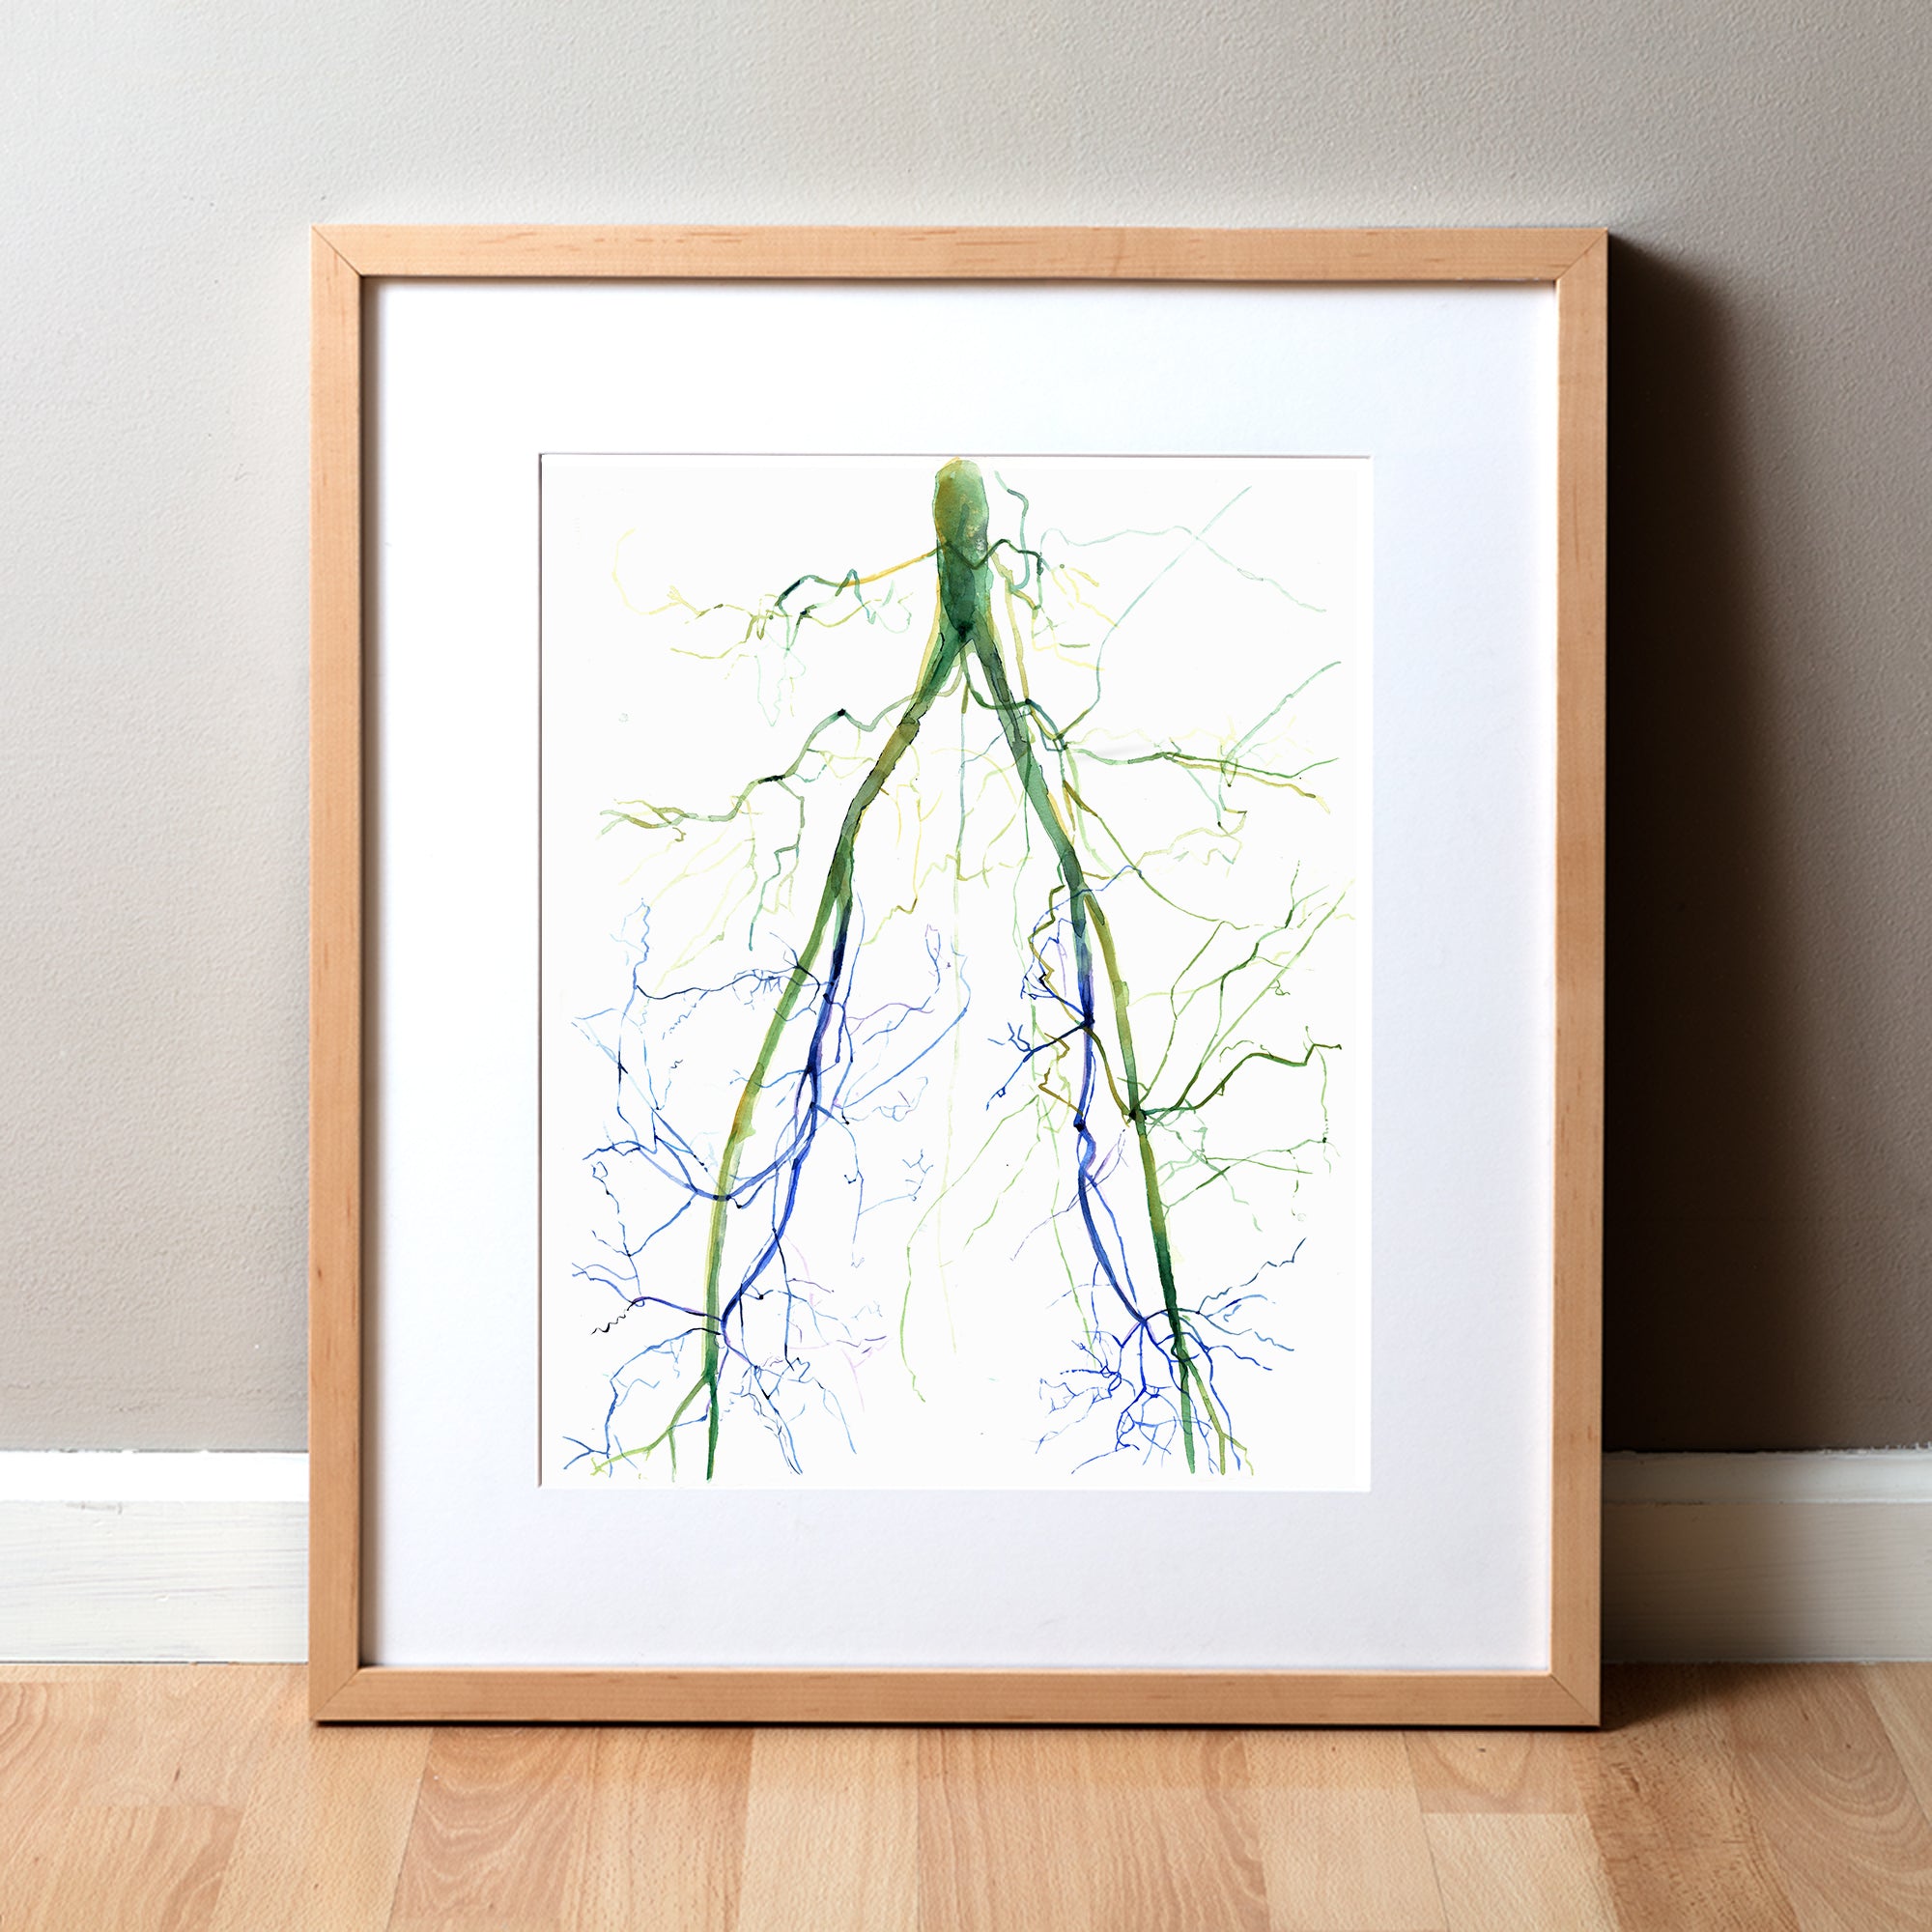 Framed watercolor painting of two angiograms combined into one. The painting shows the before of a blocked iliac artery and an after, unblocked iliac artery.